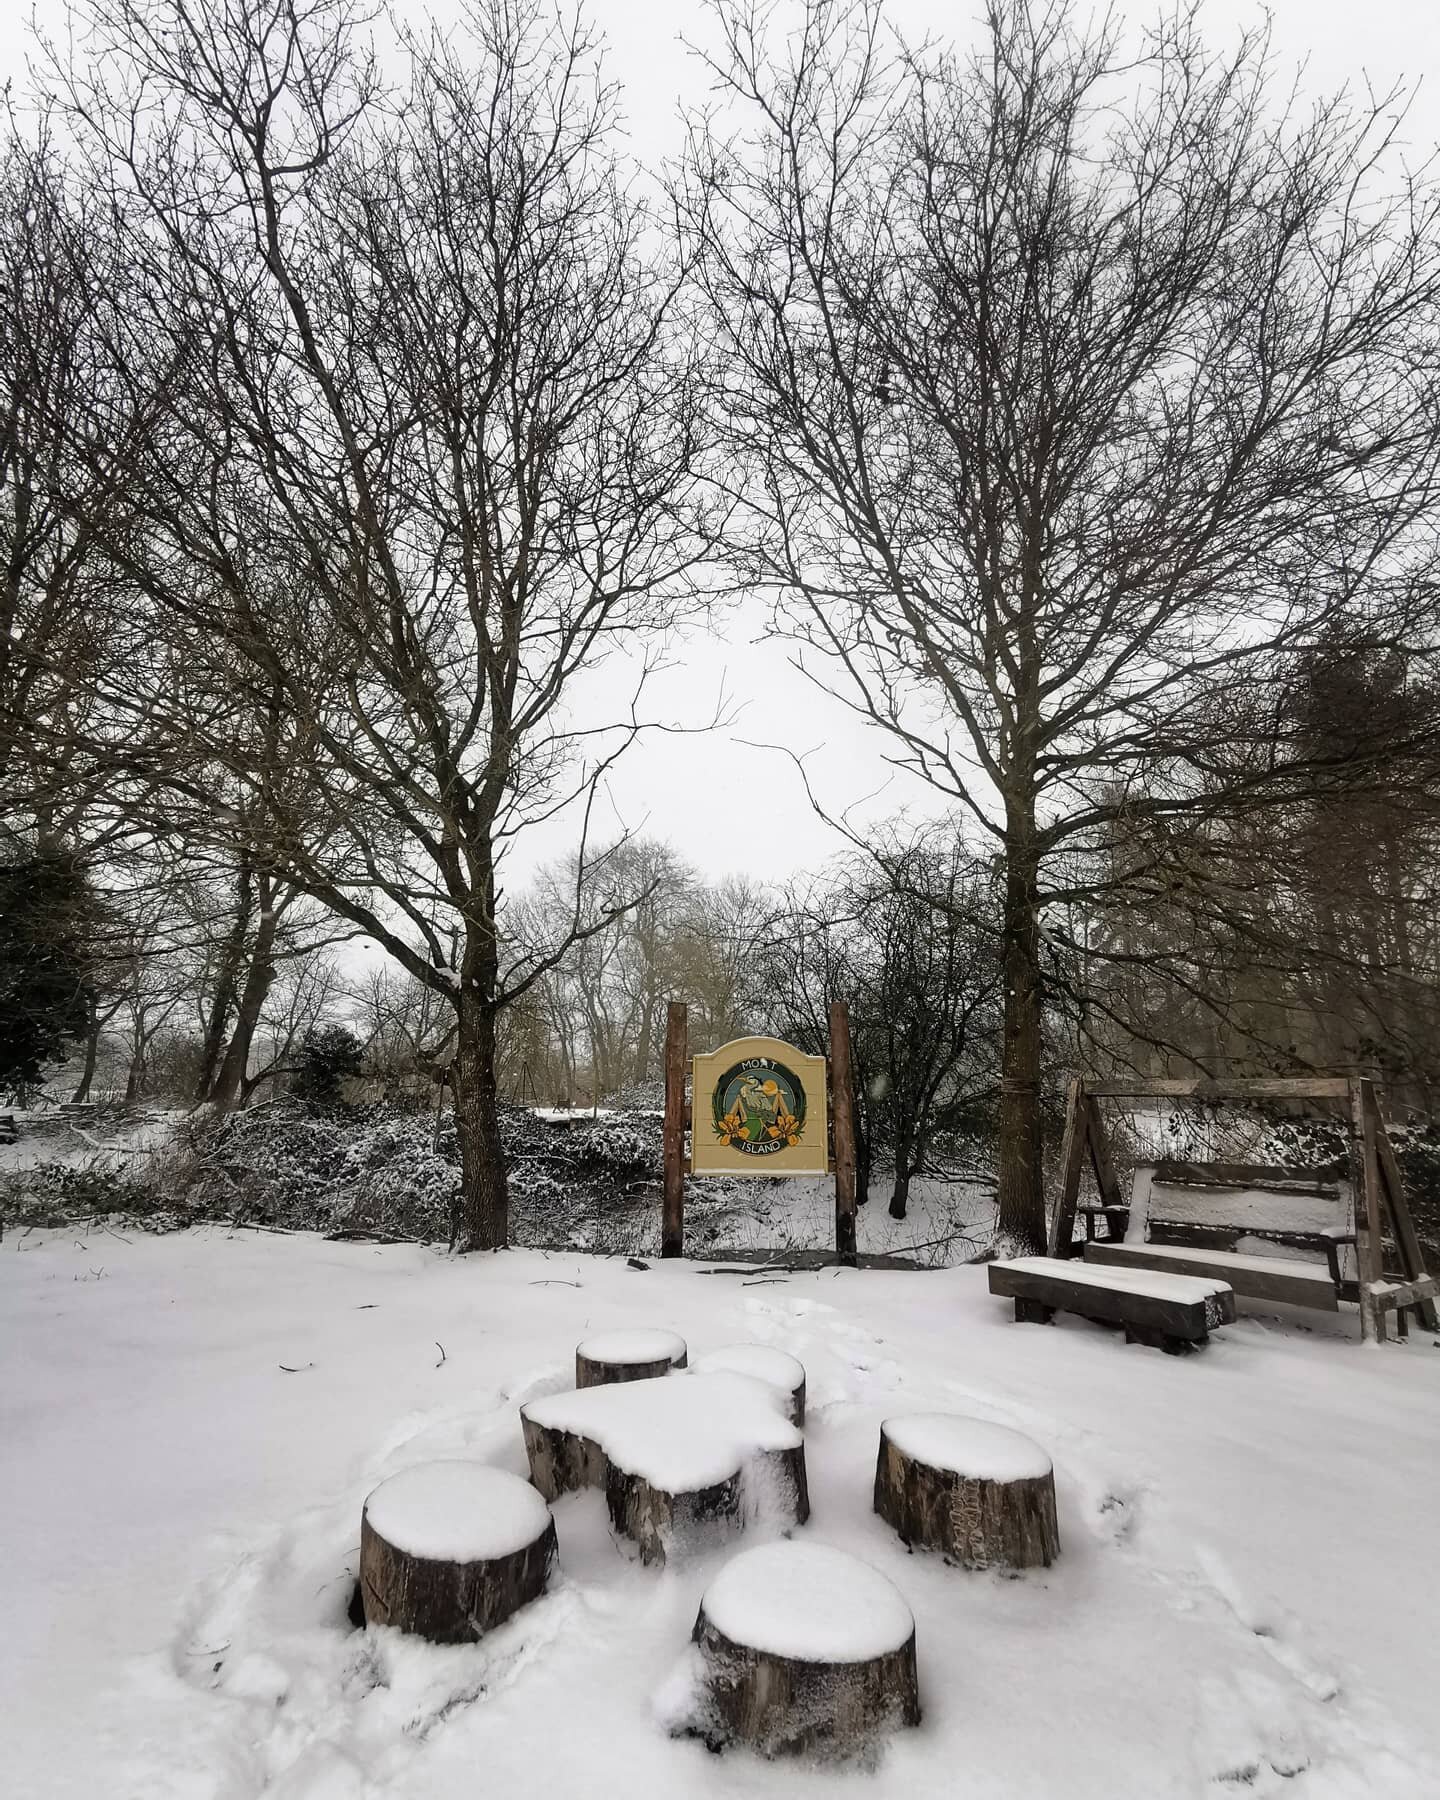 Snow day... YAY 🌨️❄️⛄❤️
.
.
.
#glamping #norfolk #norwich #moatisland #wildswimming #staycation #snowday #snow